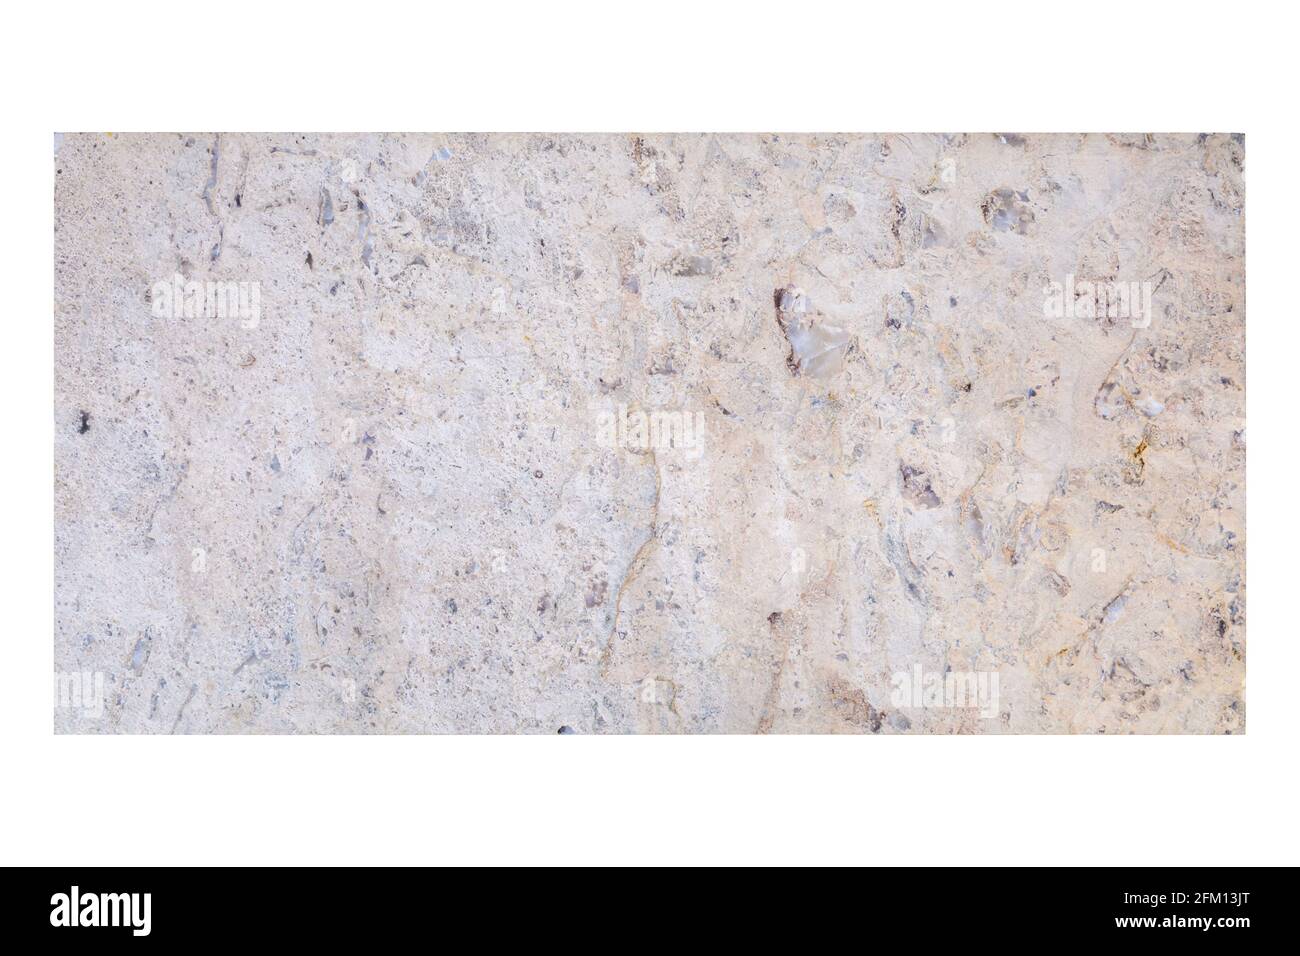 Dolomite natural stone texture. Stone with beige pattern on a smooth surface. Finishing building material. Stock Photo